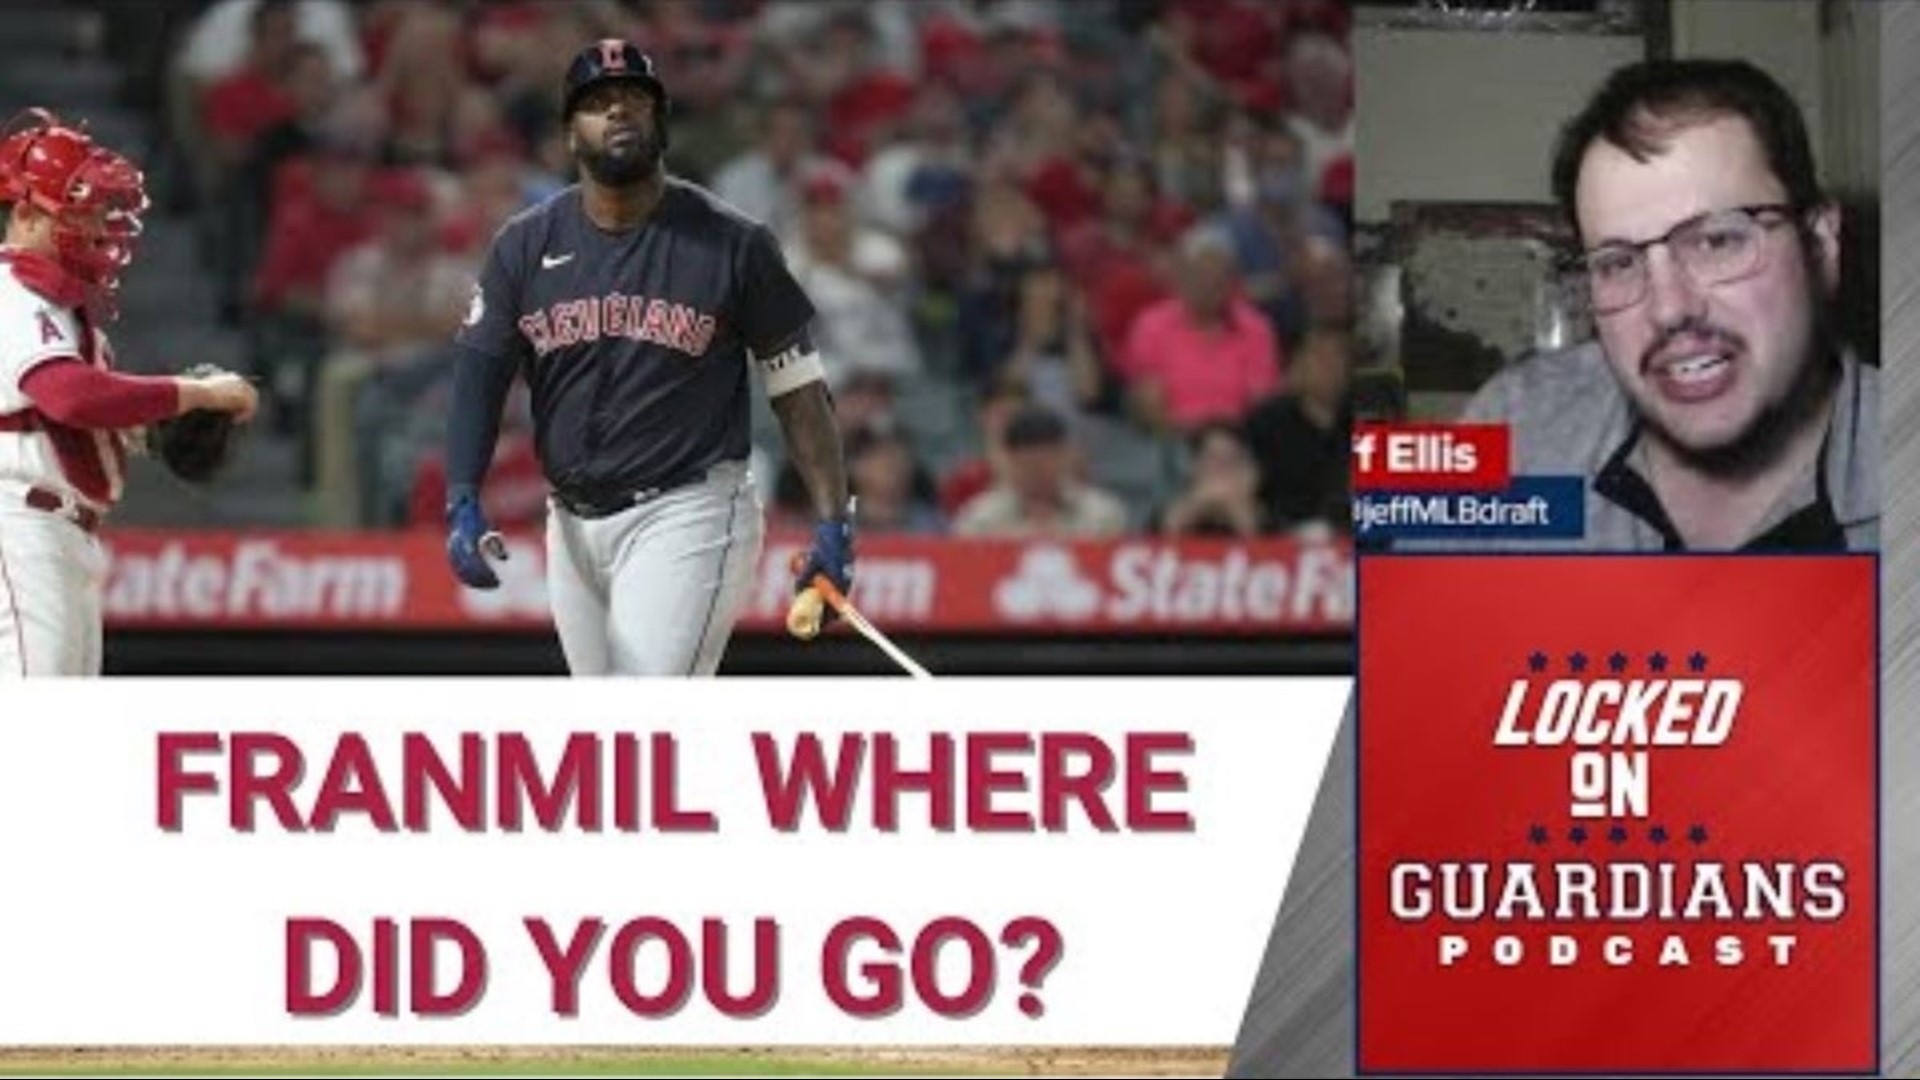 In this edition of Locked On Guardians, we talk about Franmil Reyes who was projected to be a plus hitter for this team, but has hit worse than most pitchers.